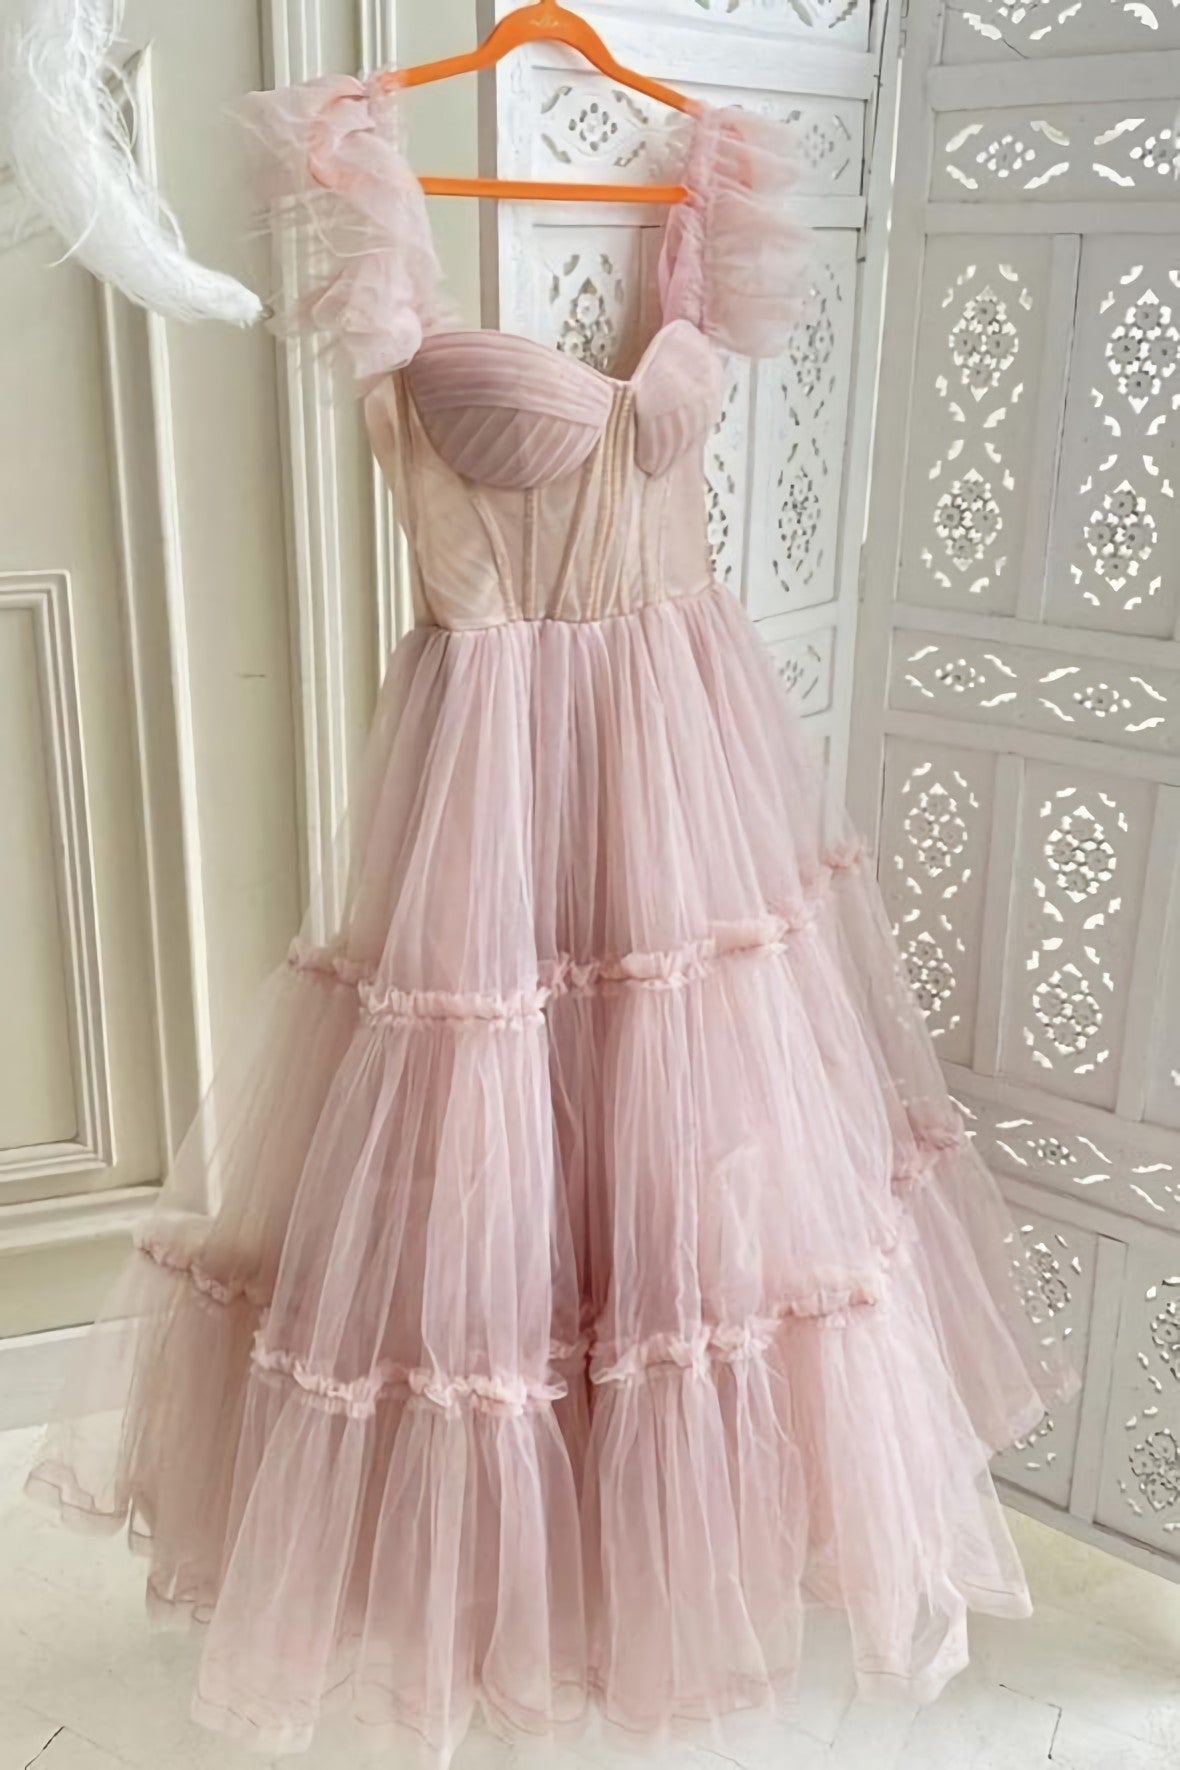 Prom Theme, Cute Tulle Short Prom Dress, Pink Evening Dress